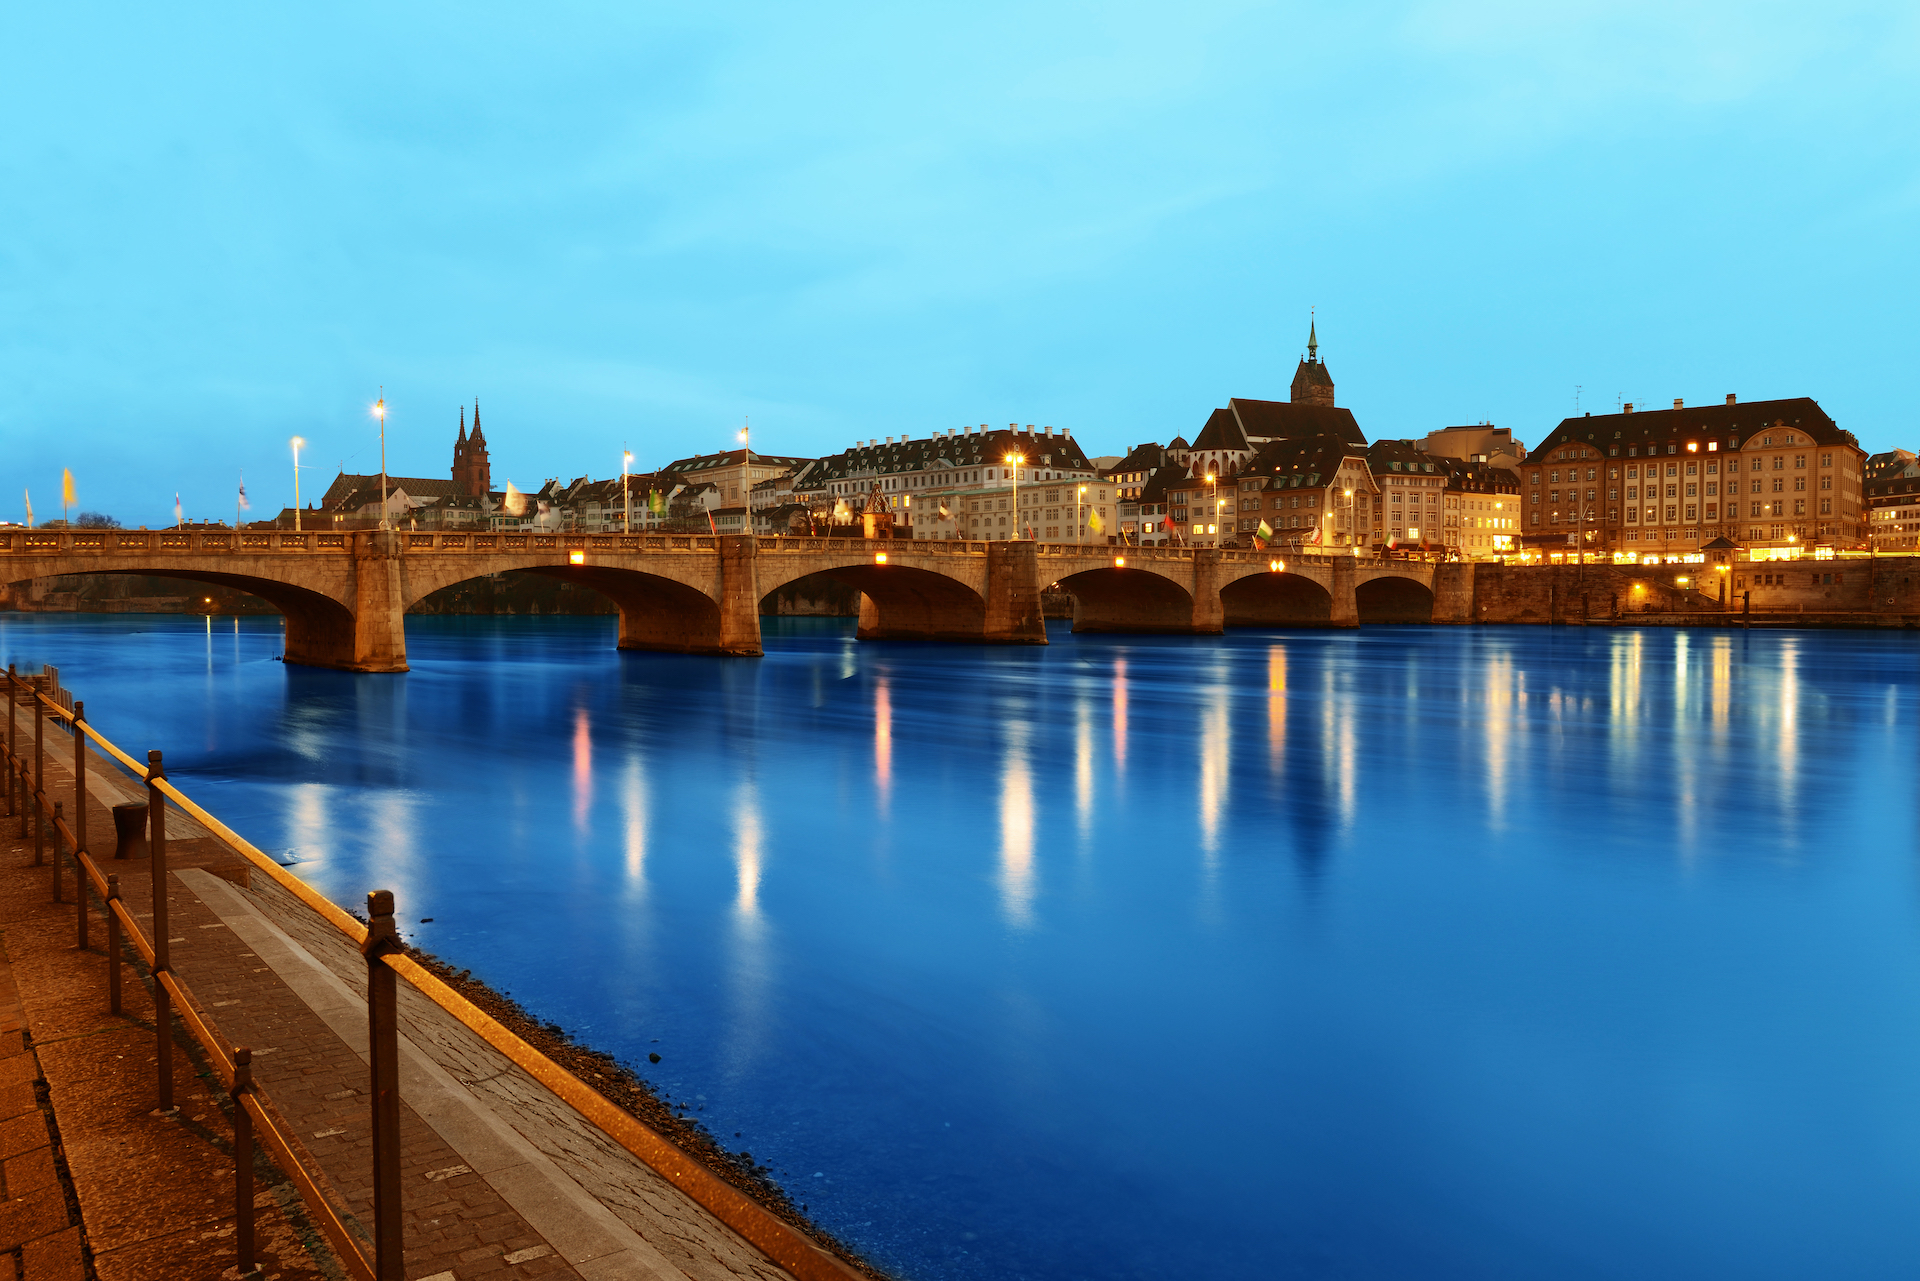 Discover the beauty of Basel in this breathtaking image: Historic architecture, vibrant culture, and picturesque location on the Rhine River combined.